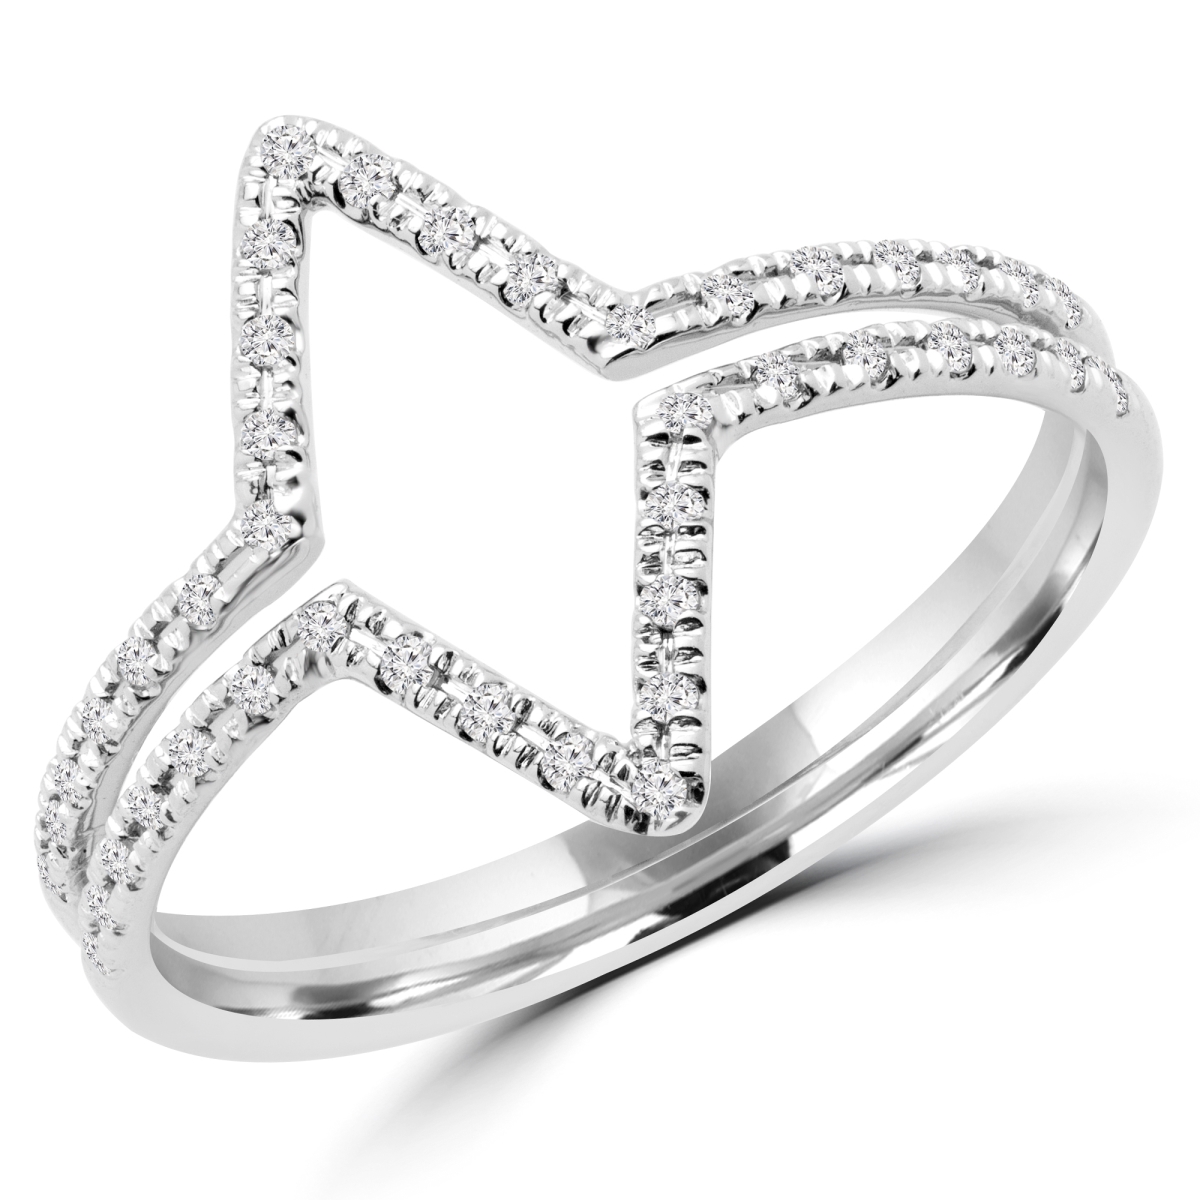 Picture of Majesty Diamonds MDR170058-3 0.13 CTW Round Diamond Cocktail Ring in 14K White Gold - Size 3